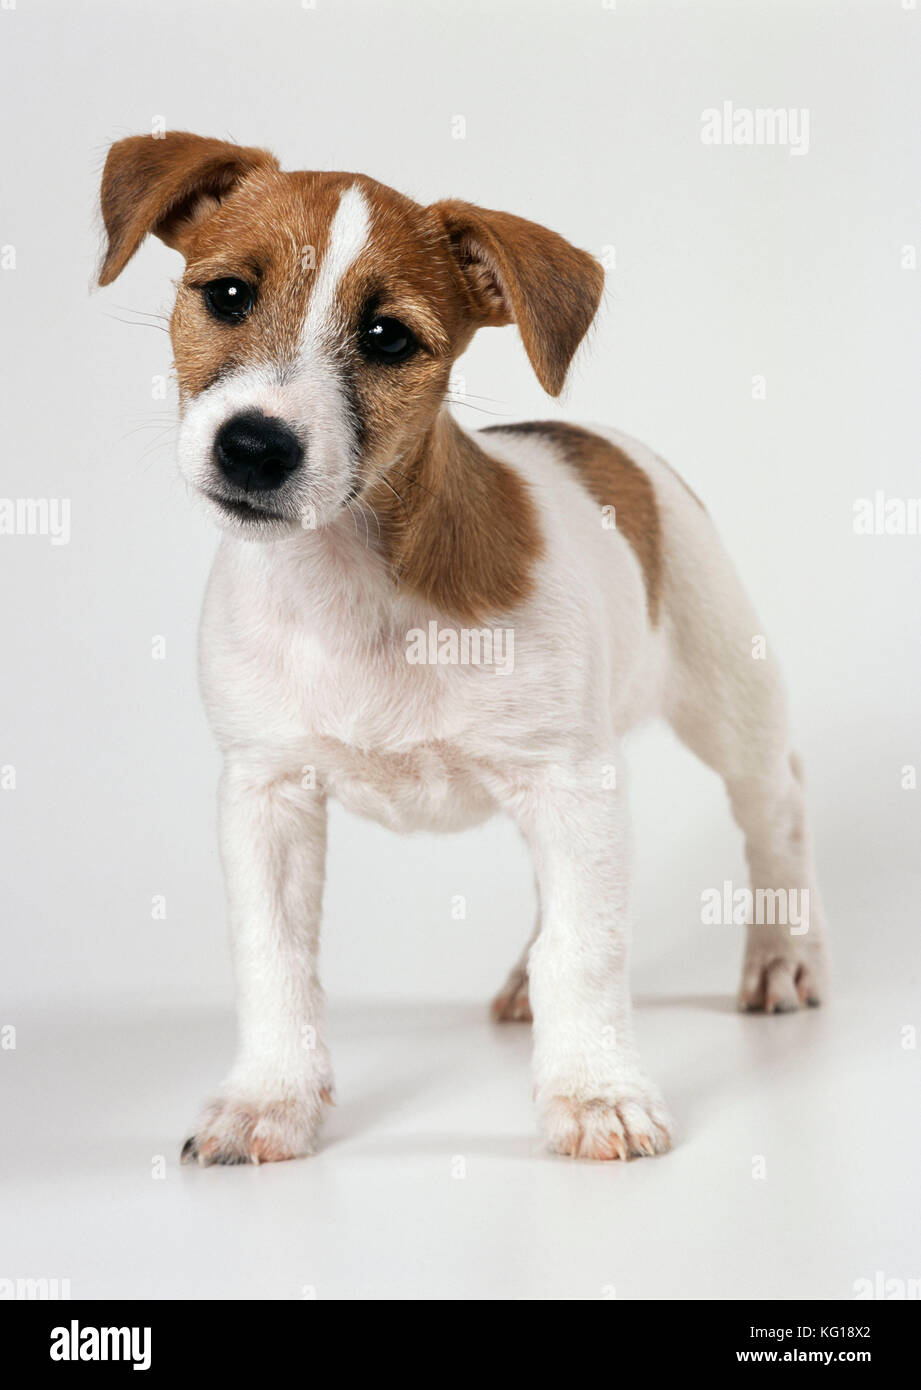 Dog Jack Russell Puppy With Ears Raised Stock Photo 164756762